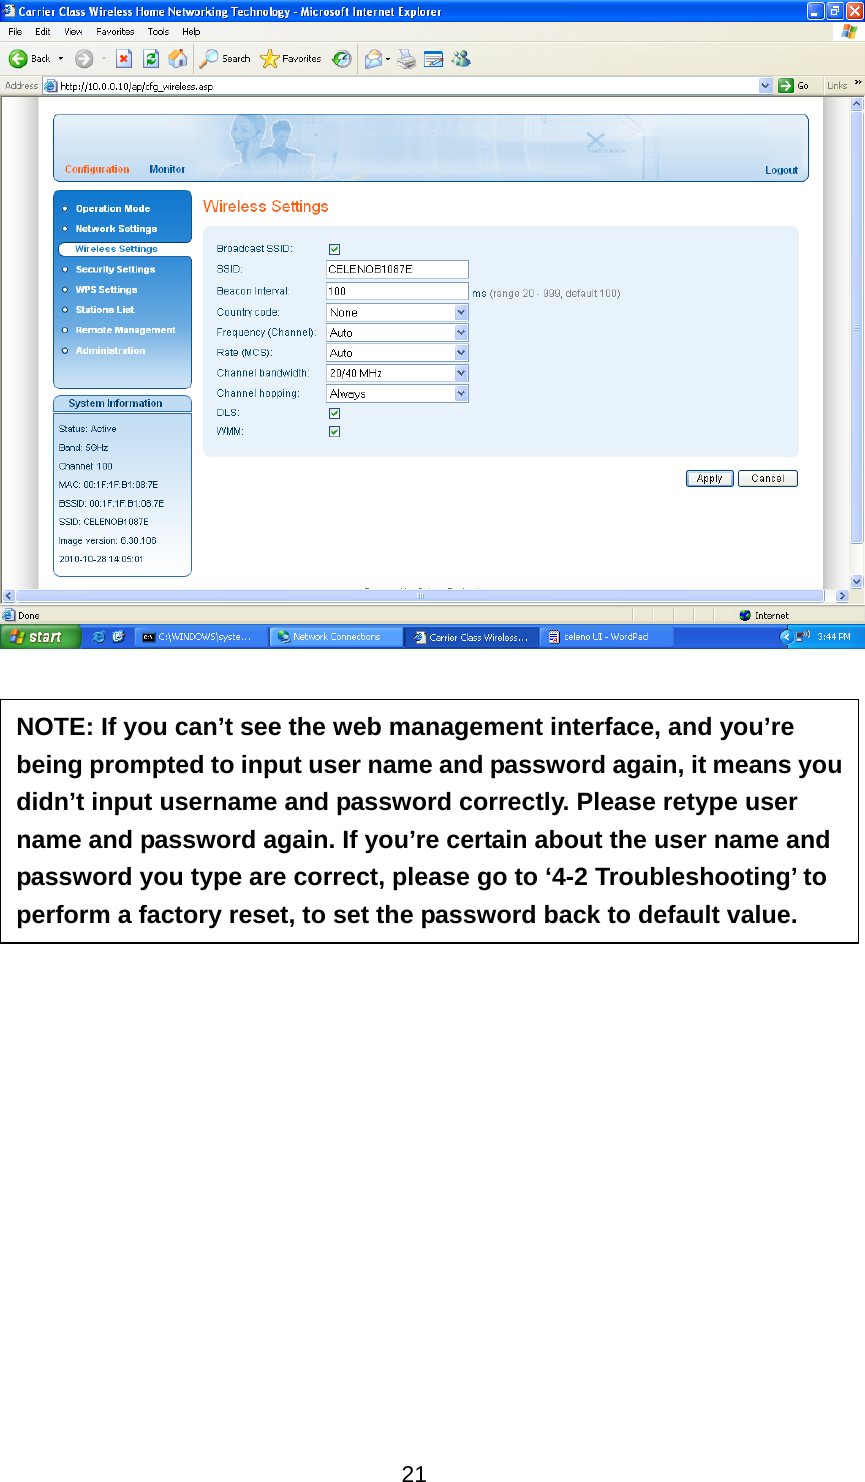 21                 NOTE: If you can’t see the web management interface, and you’re being prompted to input user name and password again, it means you didn’t input username and password correctly. Please retype user name and password again. If you’re certain about the user name and password you type are correct, please go to ‘4-2 Troubleshooting’ to perform a factory reset, to set the password back to default value. 